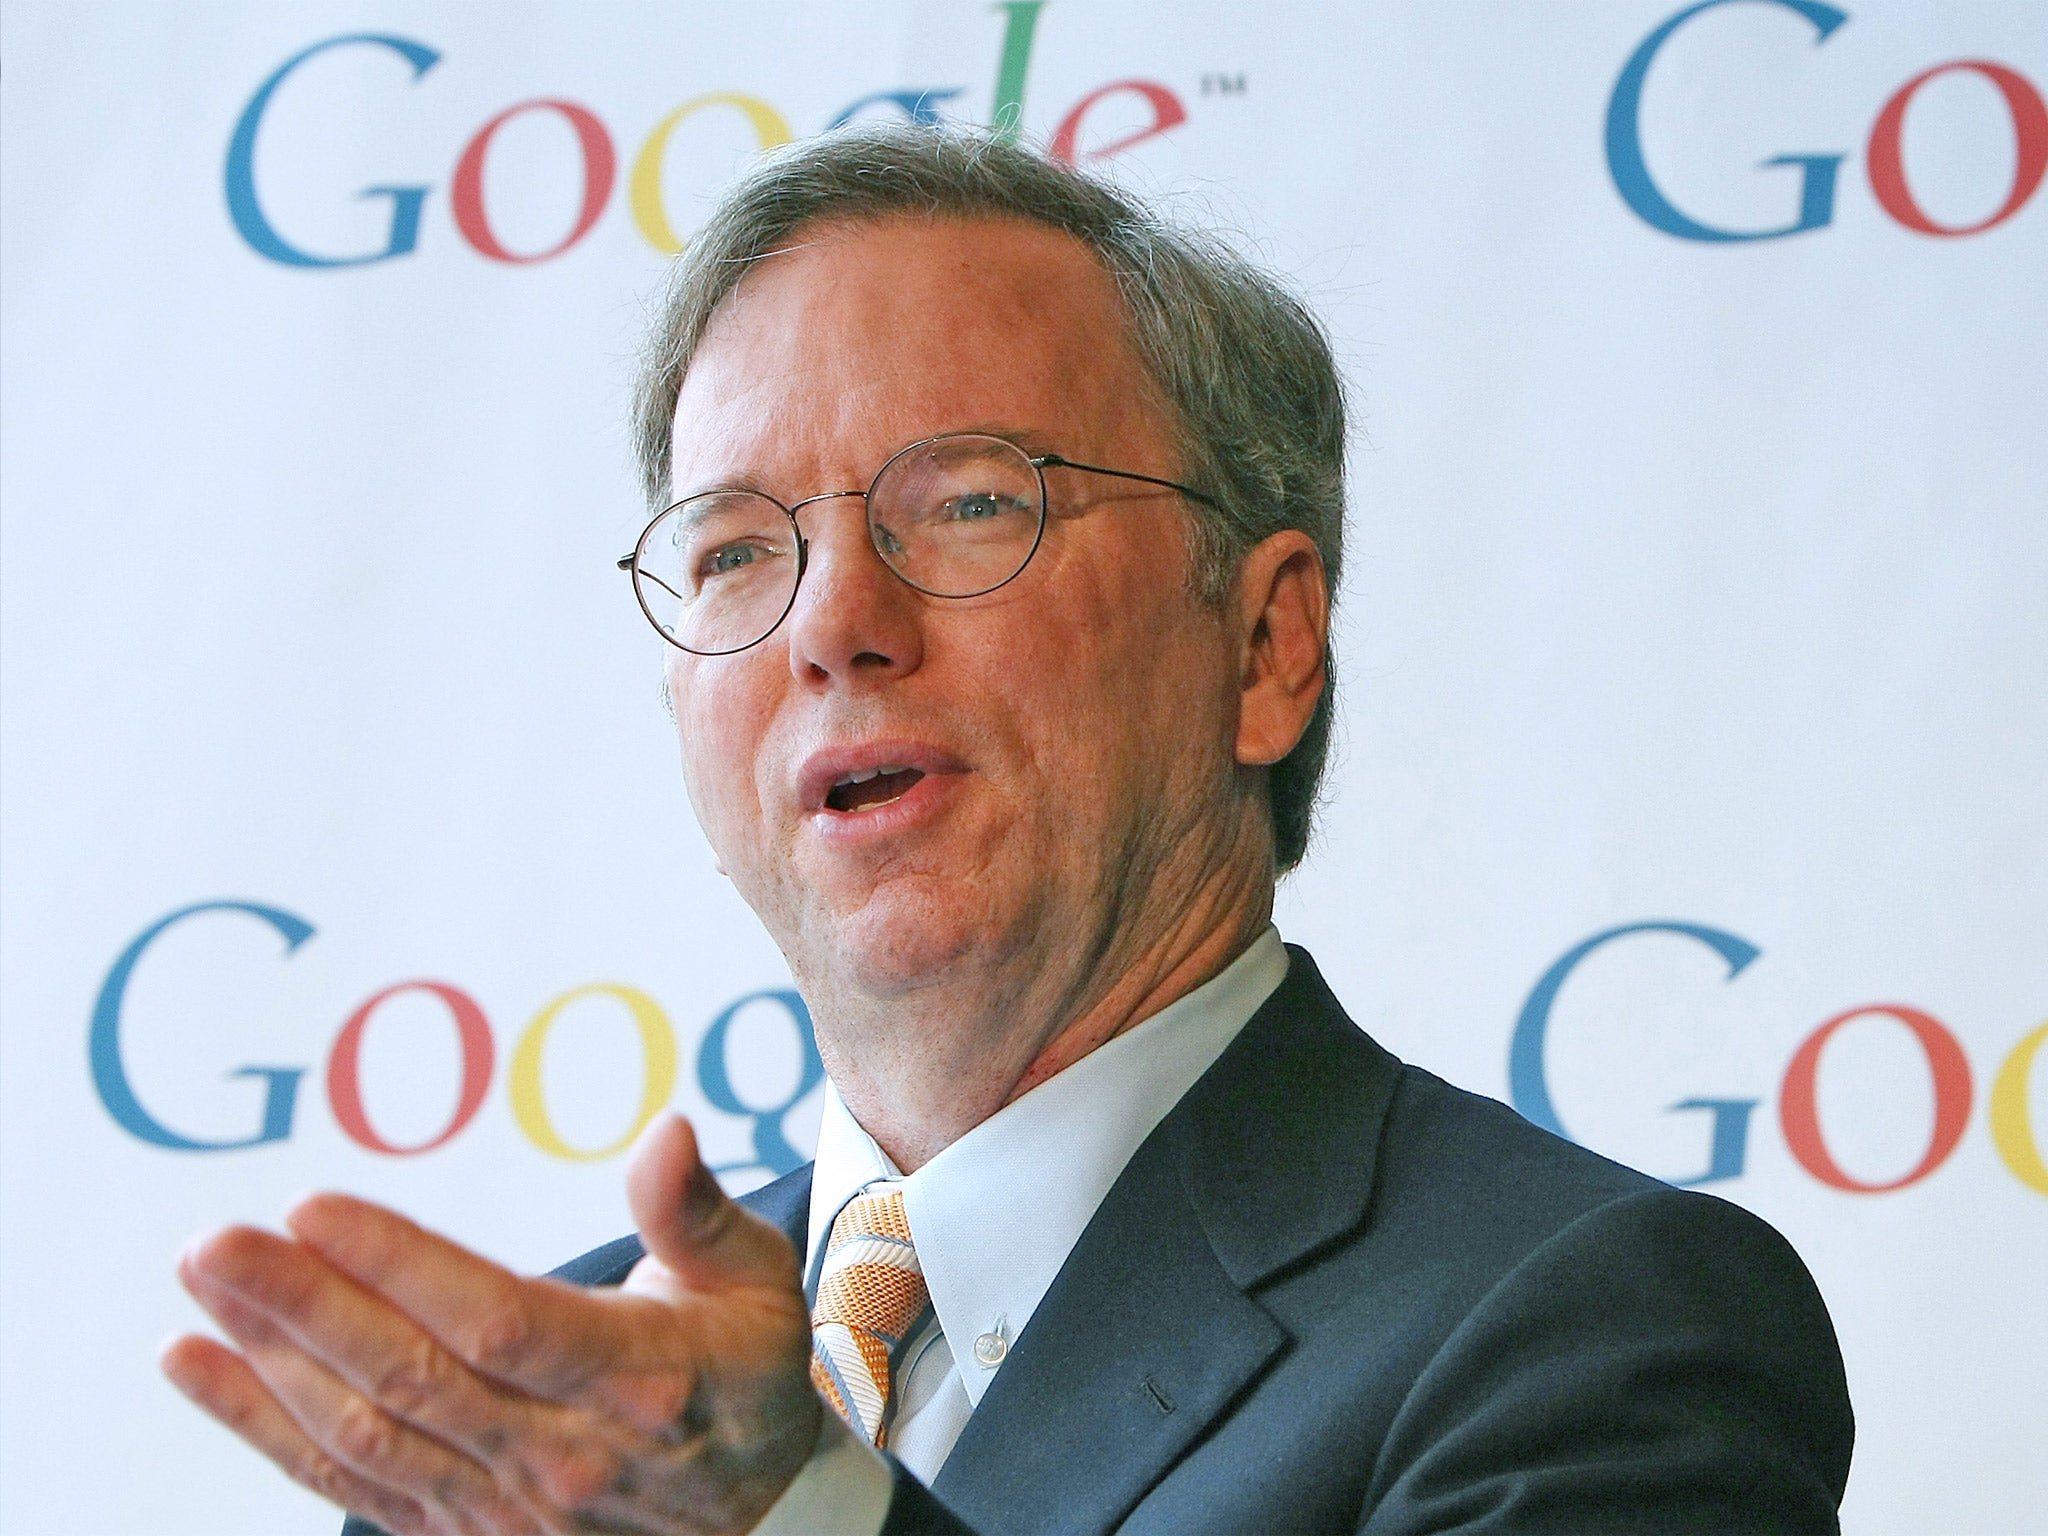 Google’s globe-trotting Executive Chairman Eric Schmidt became the latest high-profile figure to endorse reforms in Burma